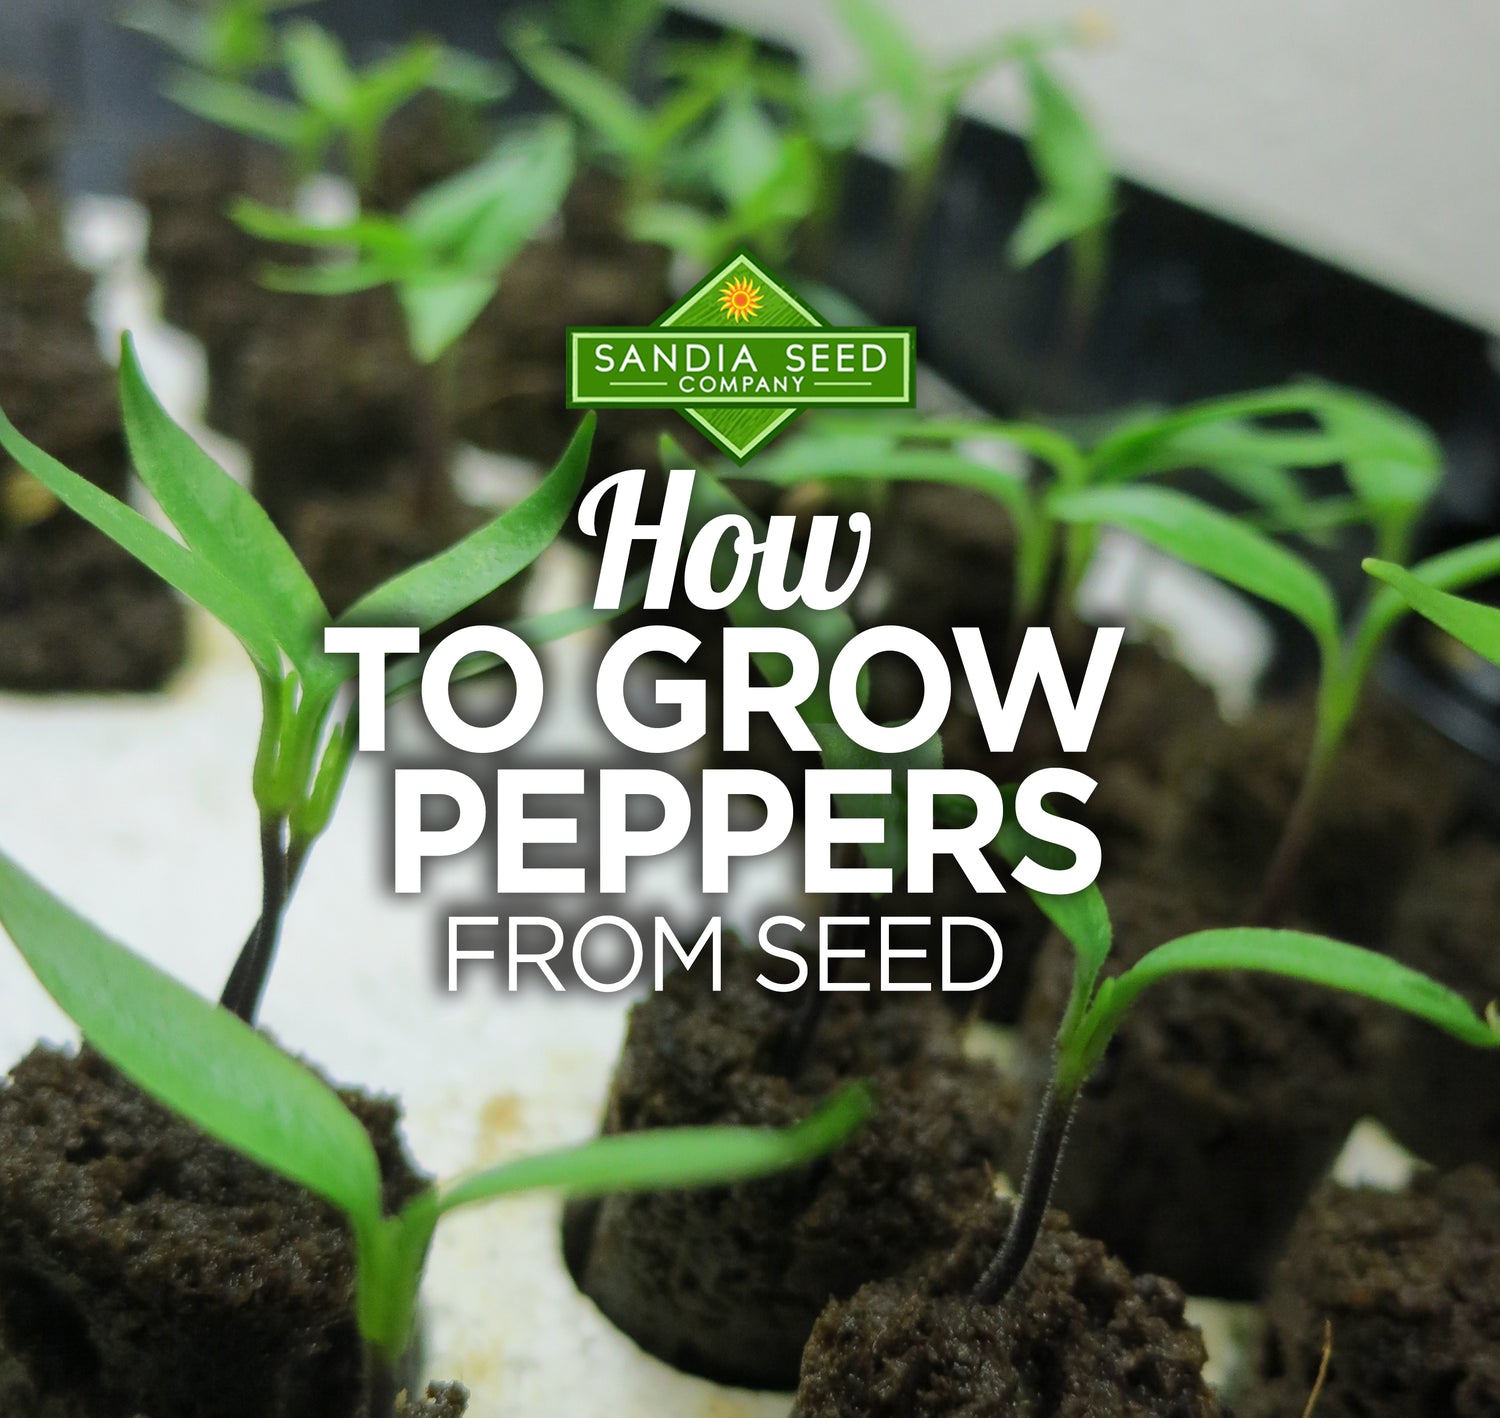 How to Grow Peppers from Seed